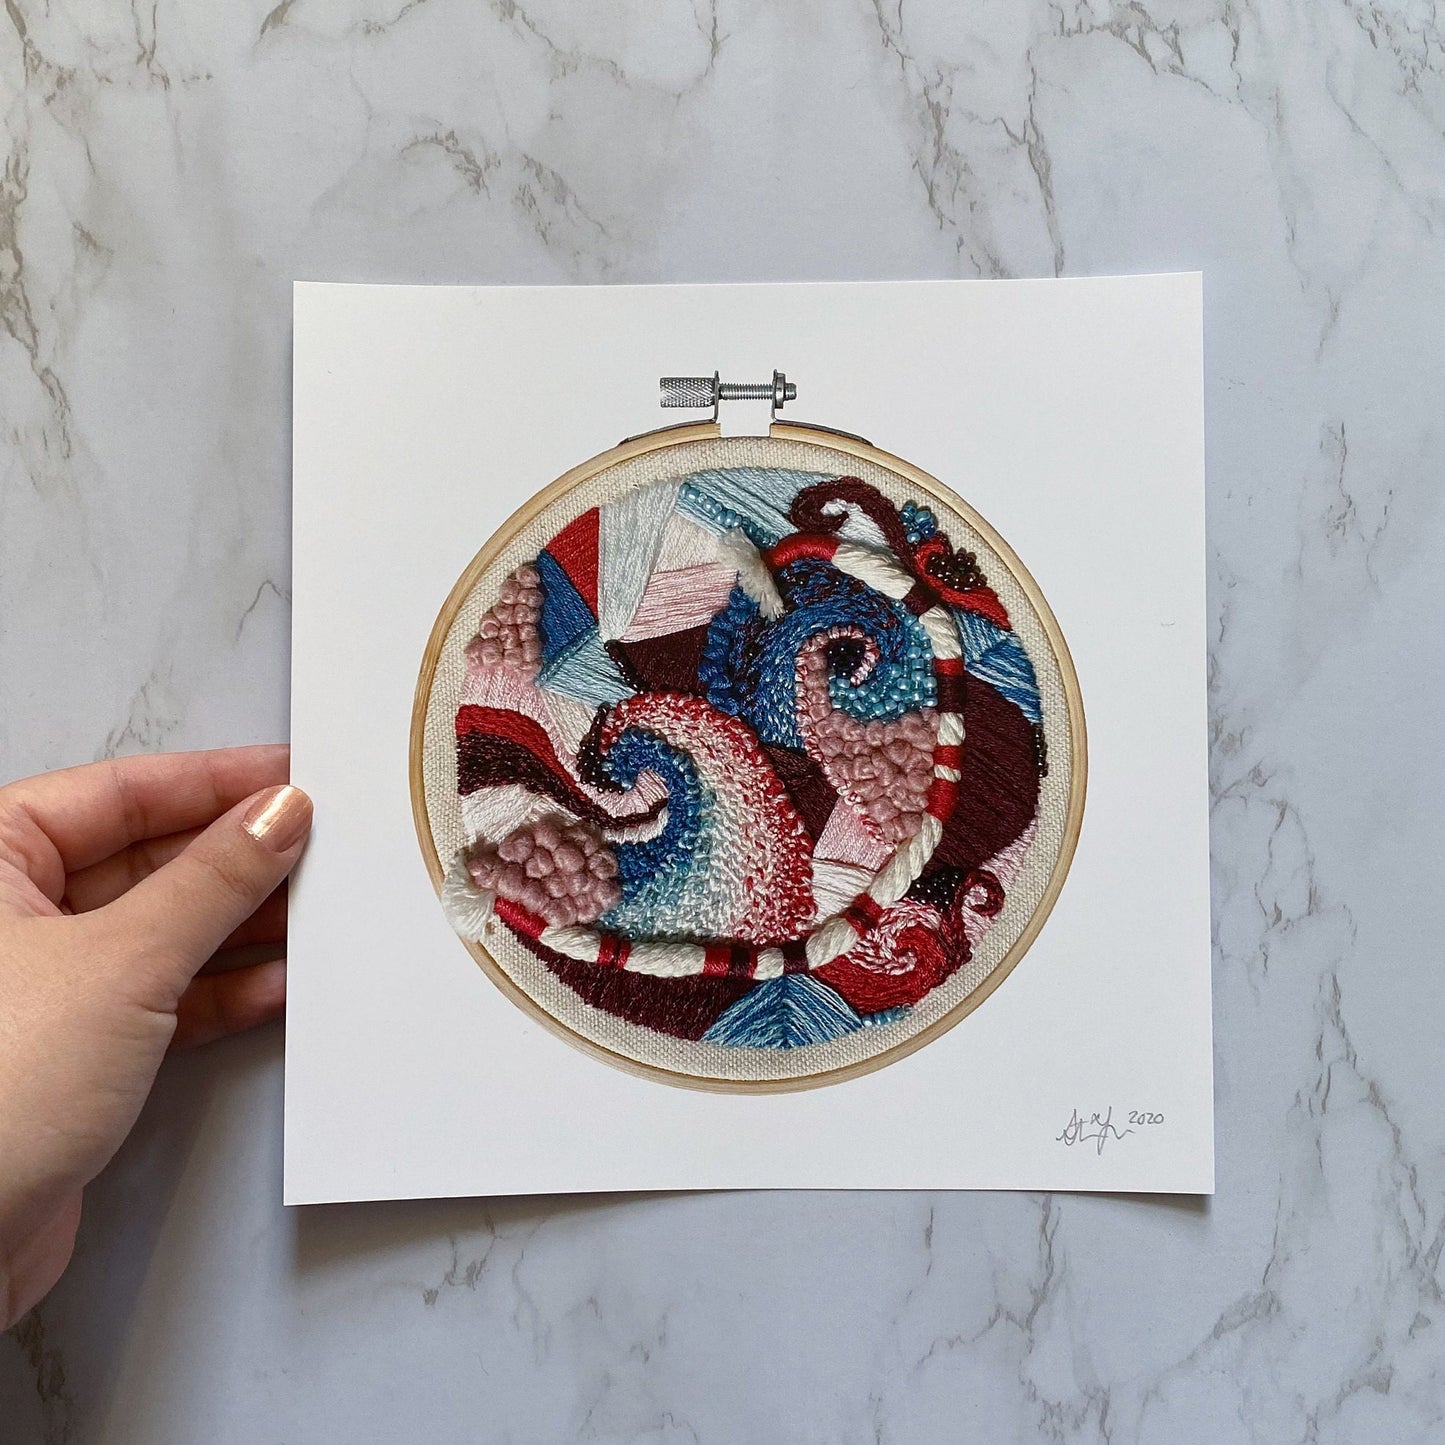 Embroidered Waves - 2020 Edition Signed Art Print